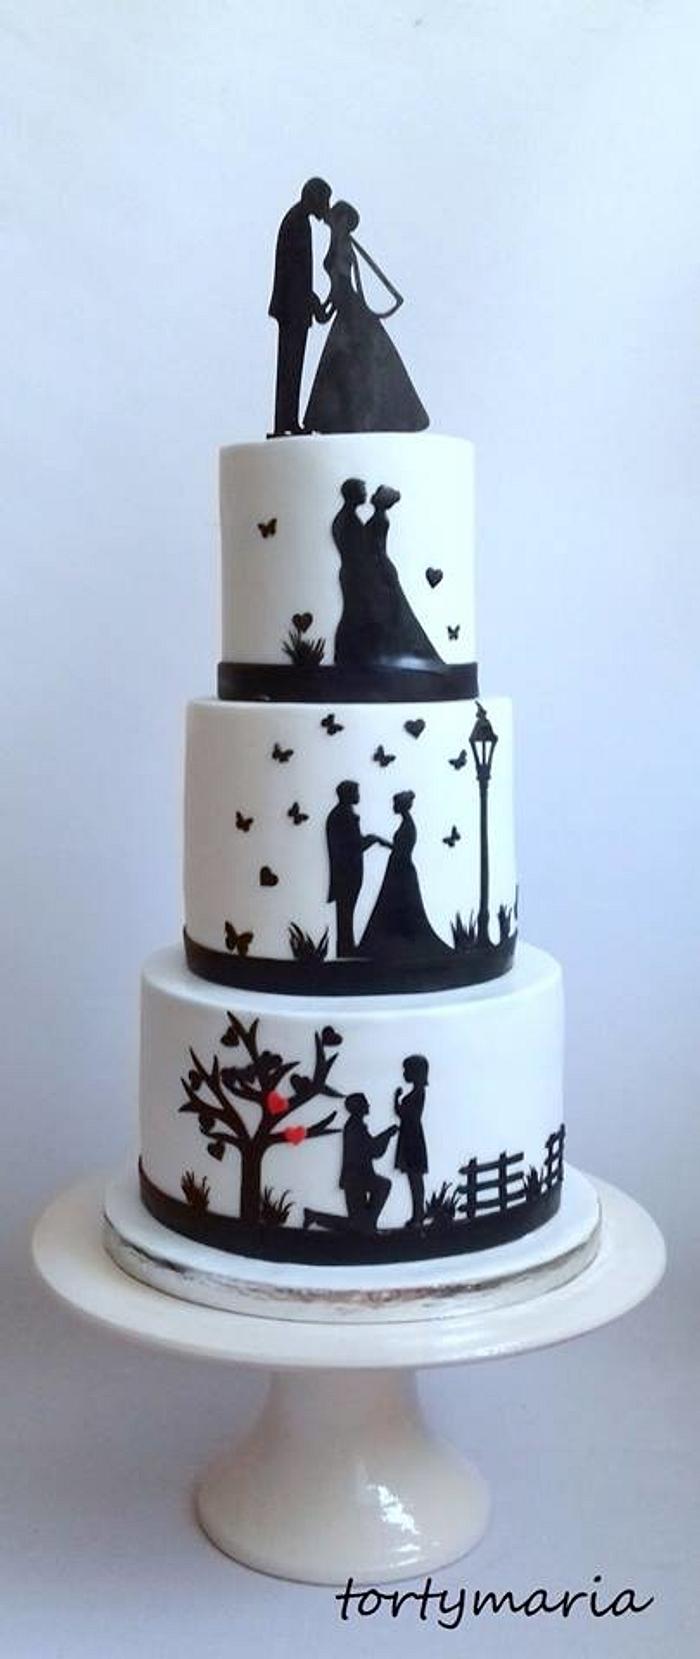 Wedding cake with silhouette